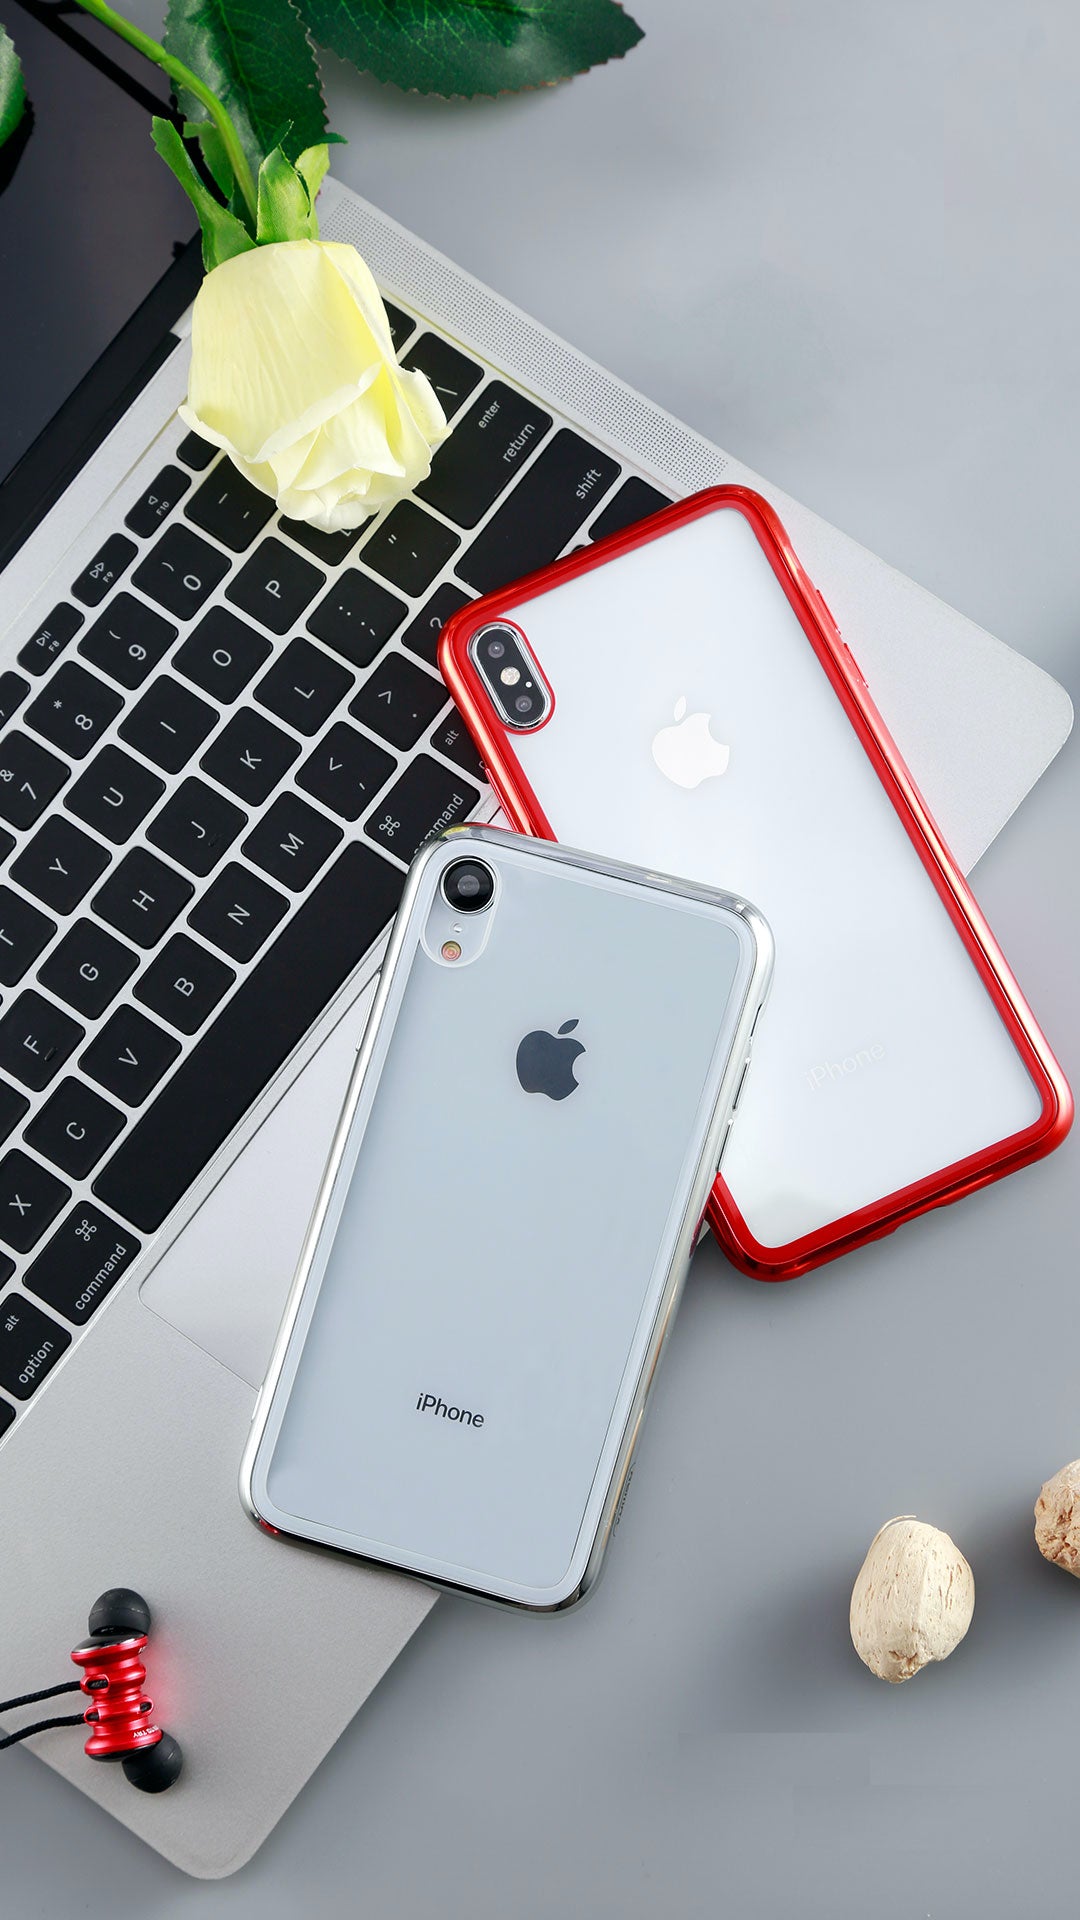 Remax Crysden series glass Case RPC-002 for iPhone XS - White